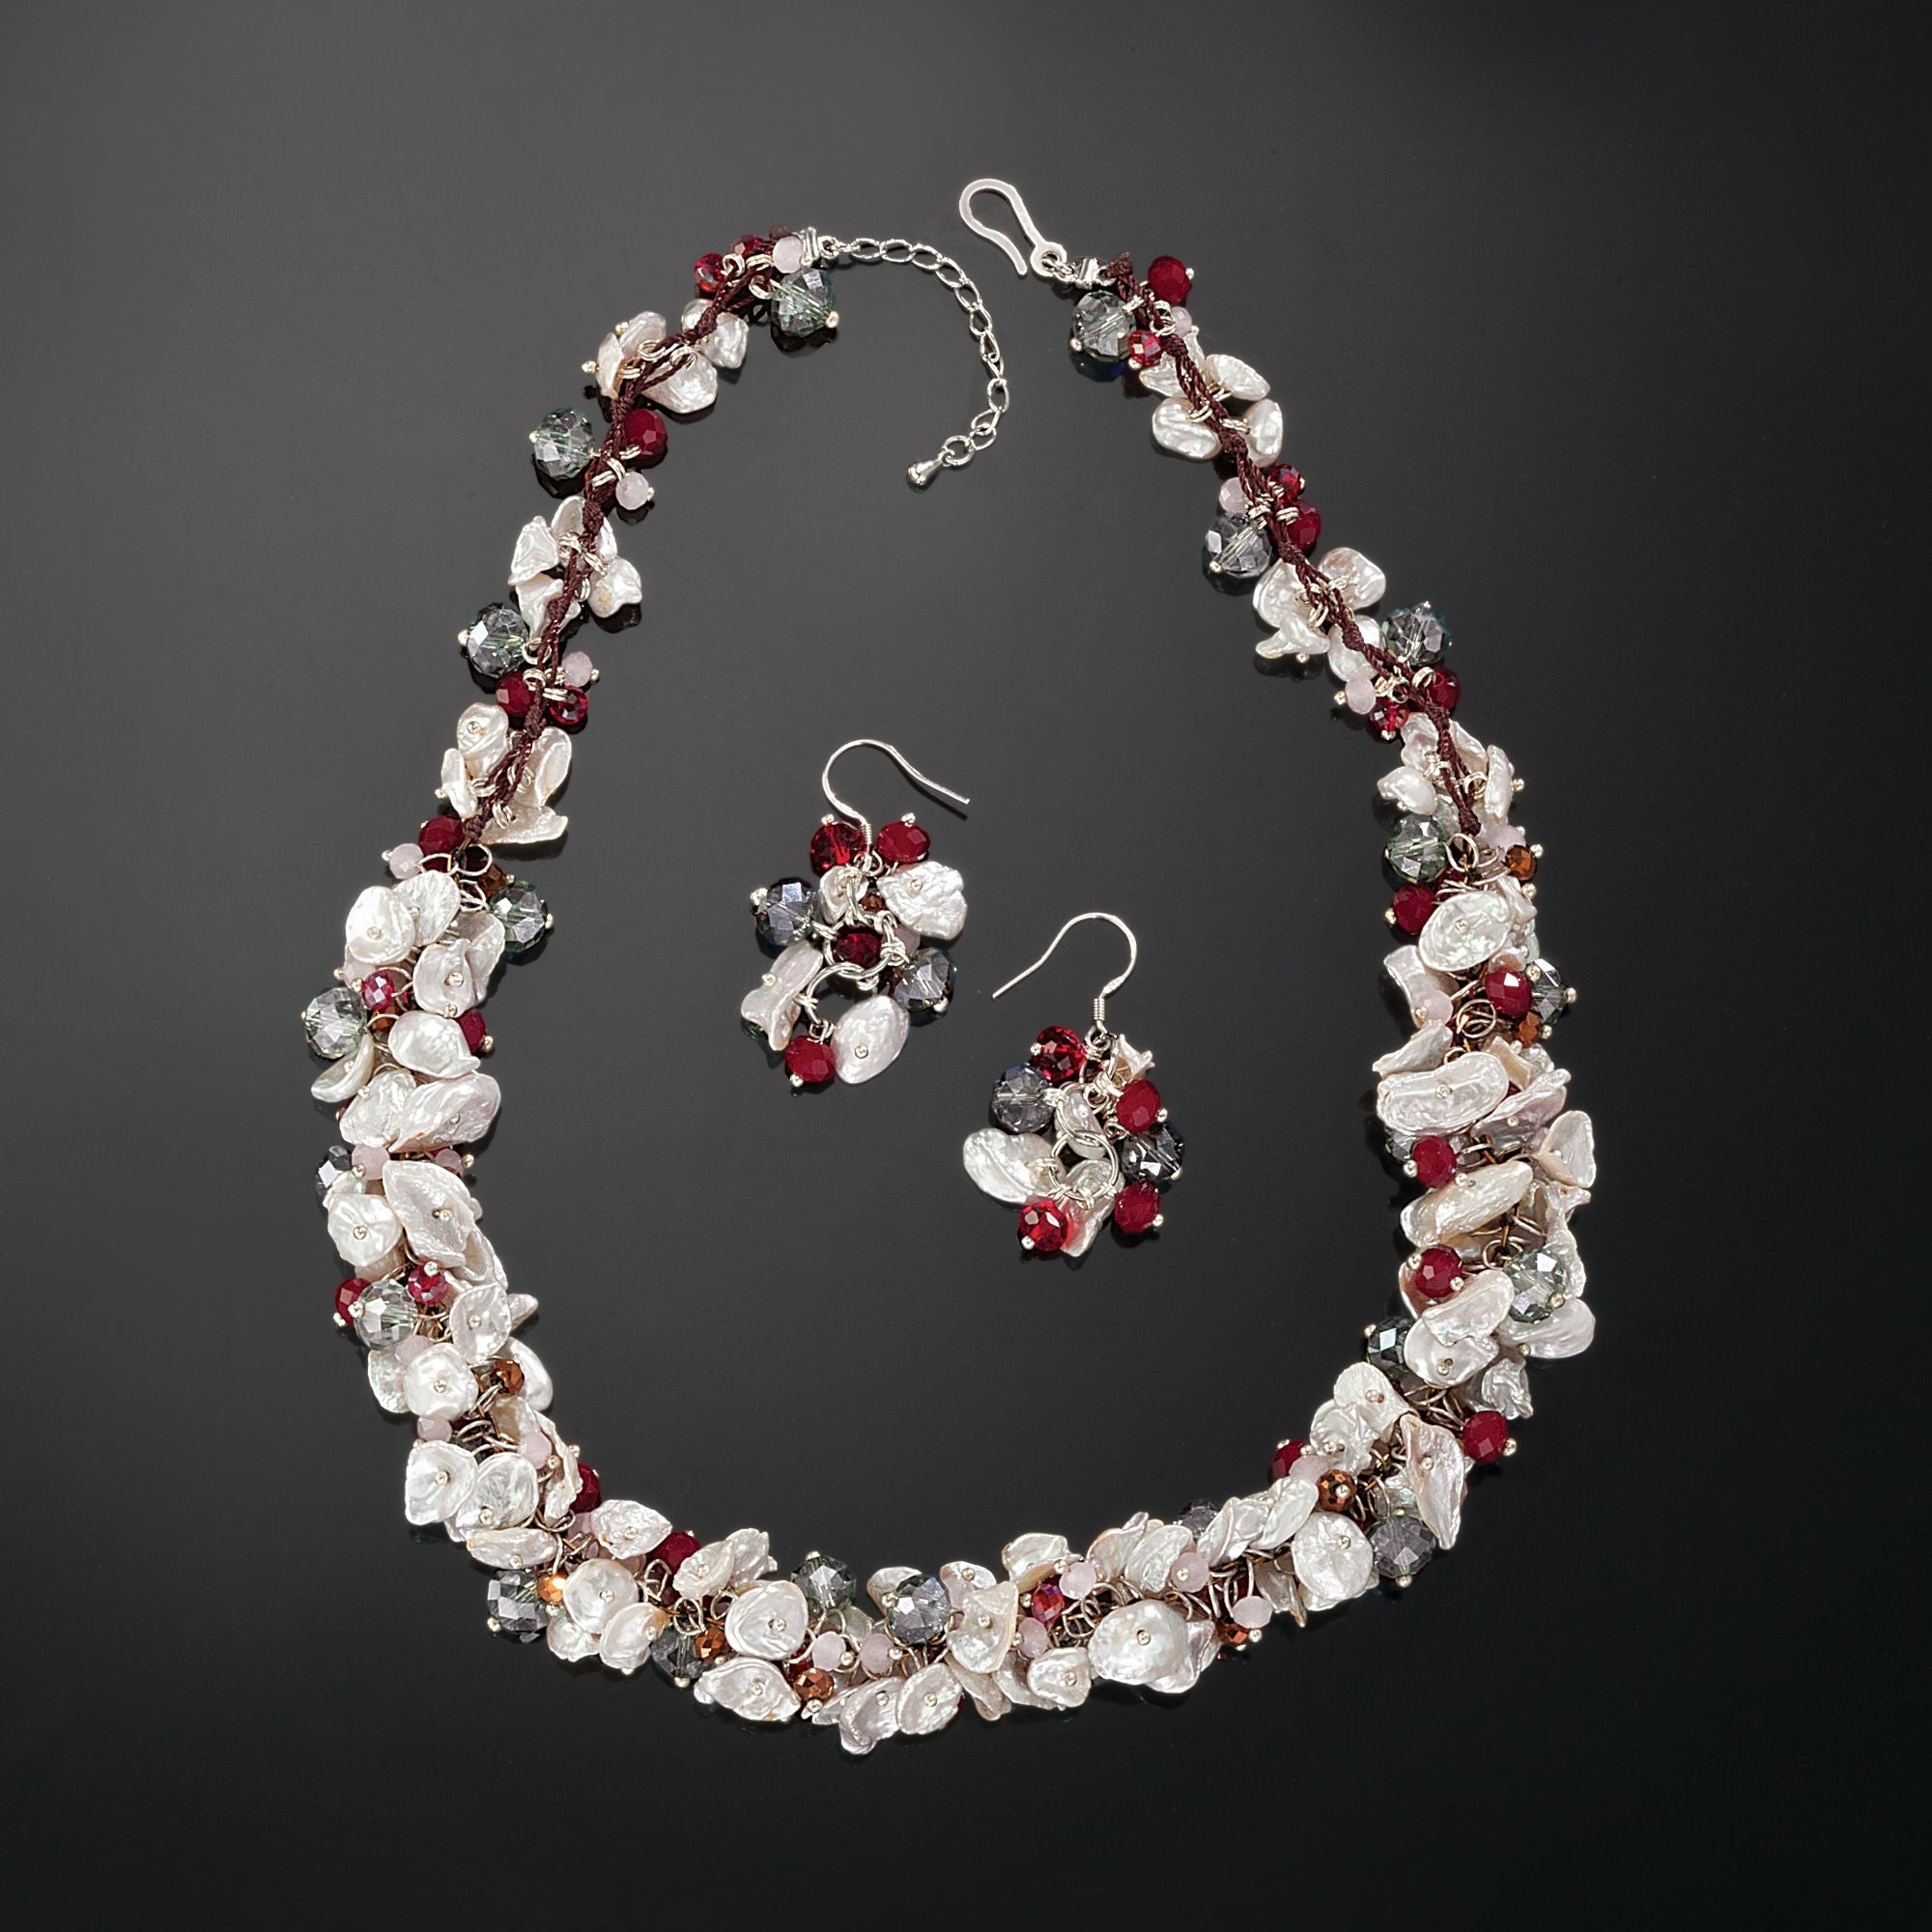 Luminance Freshwater Pearl & Crystal Necklace & Earrings Set